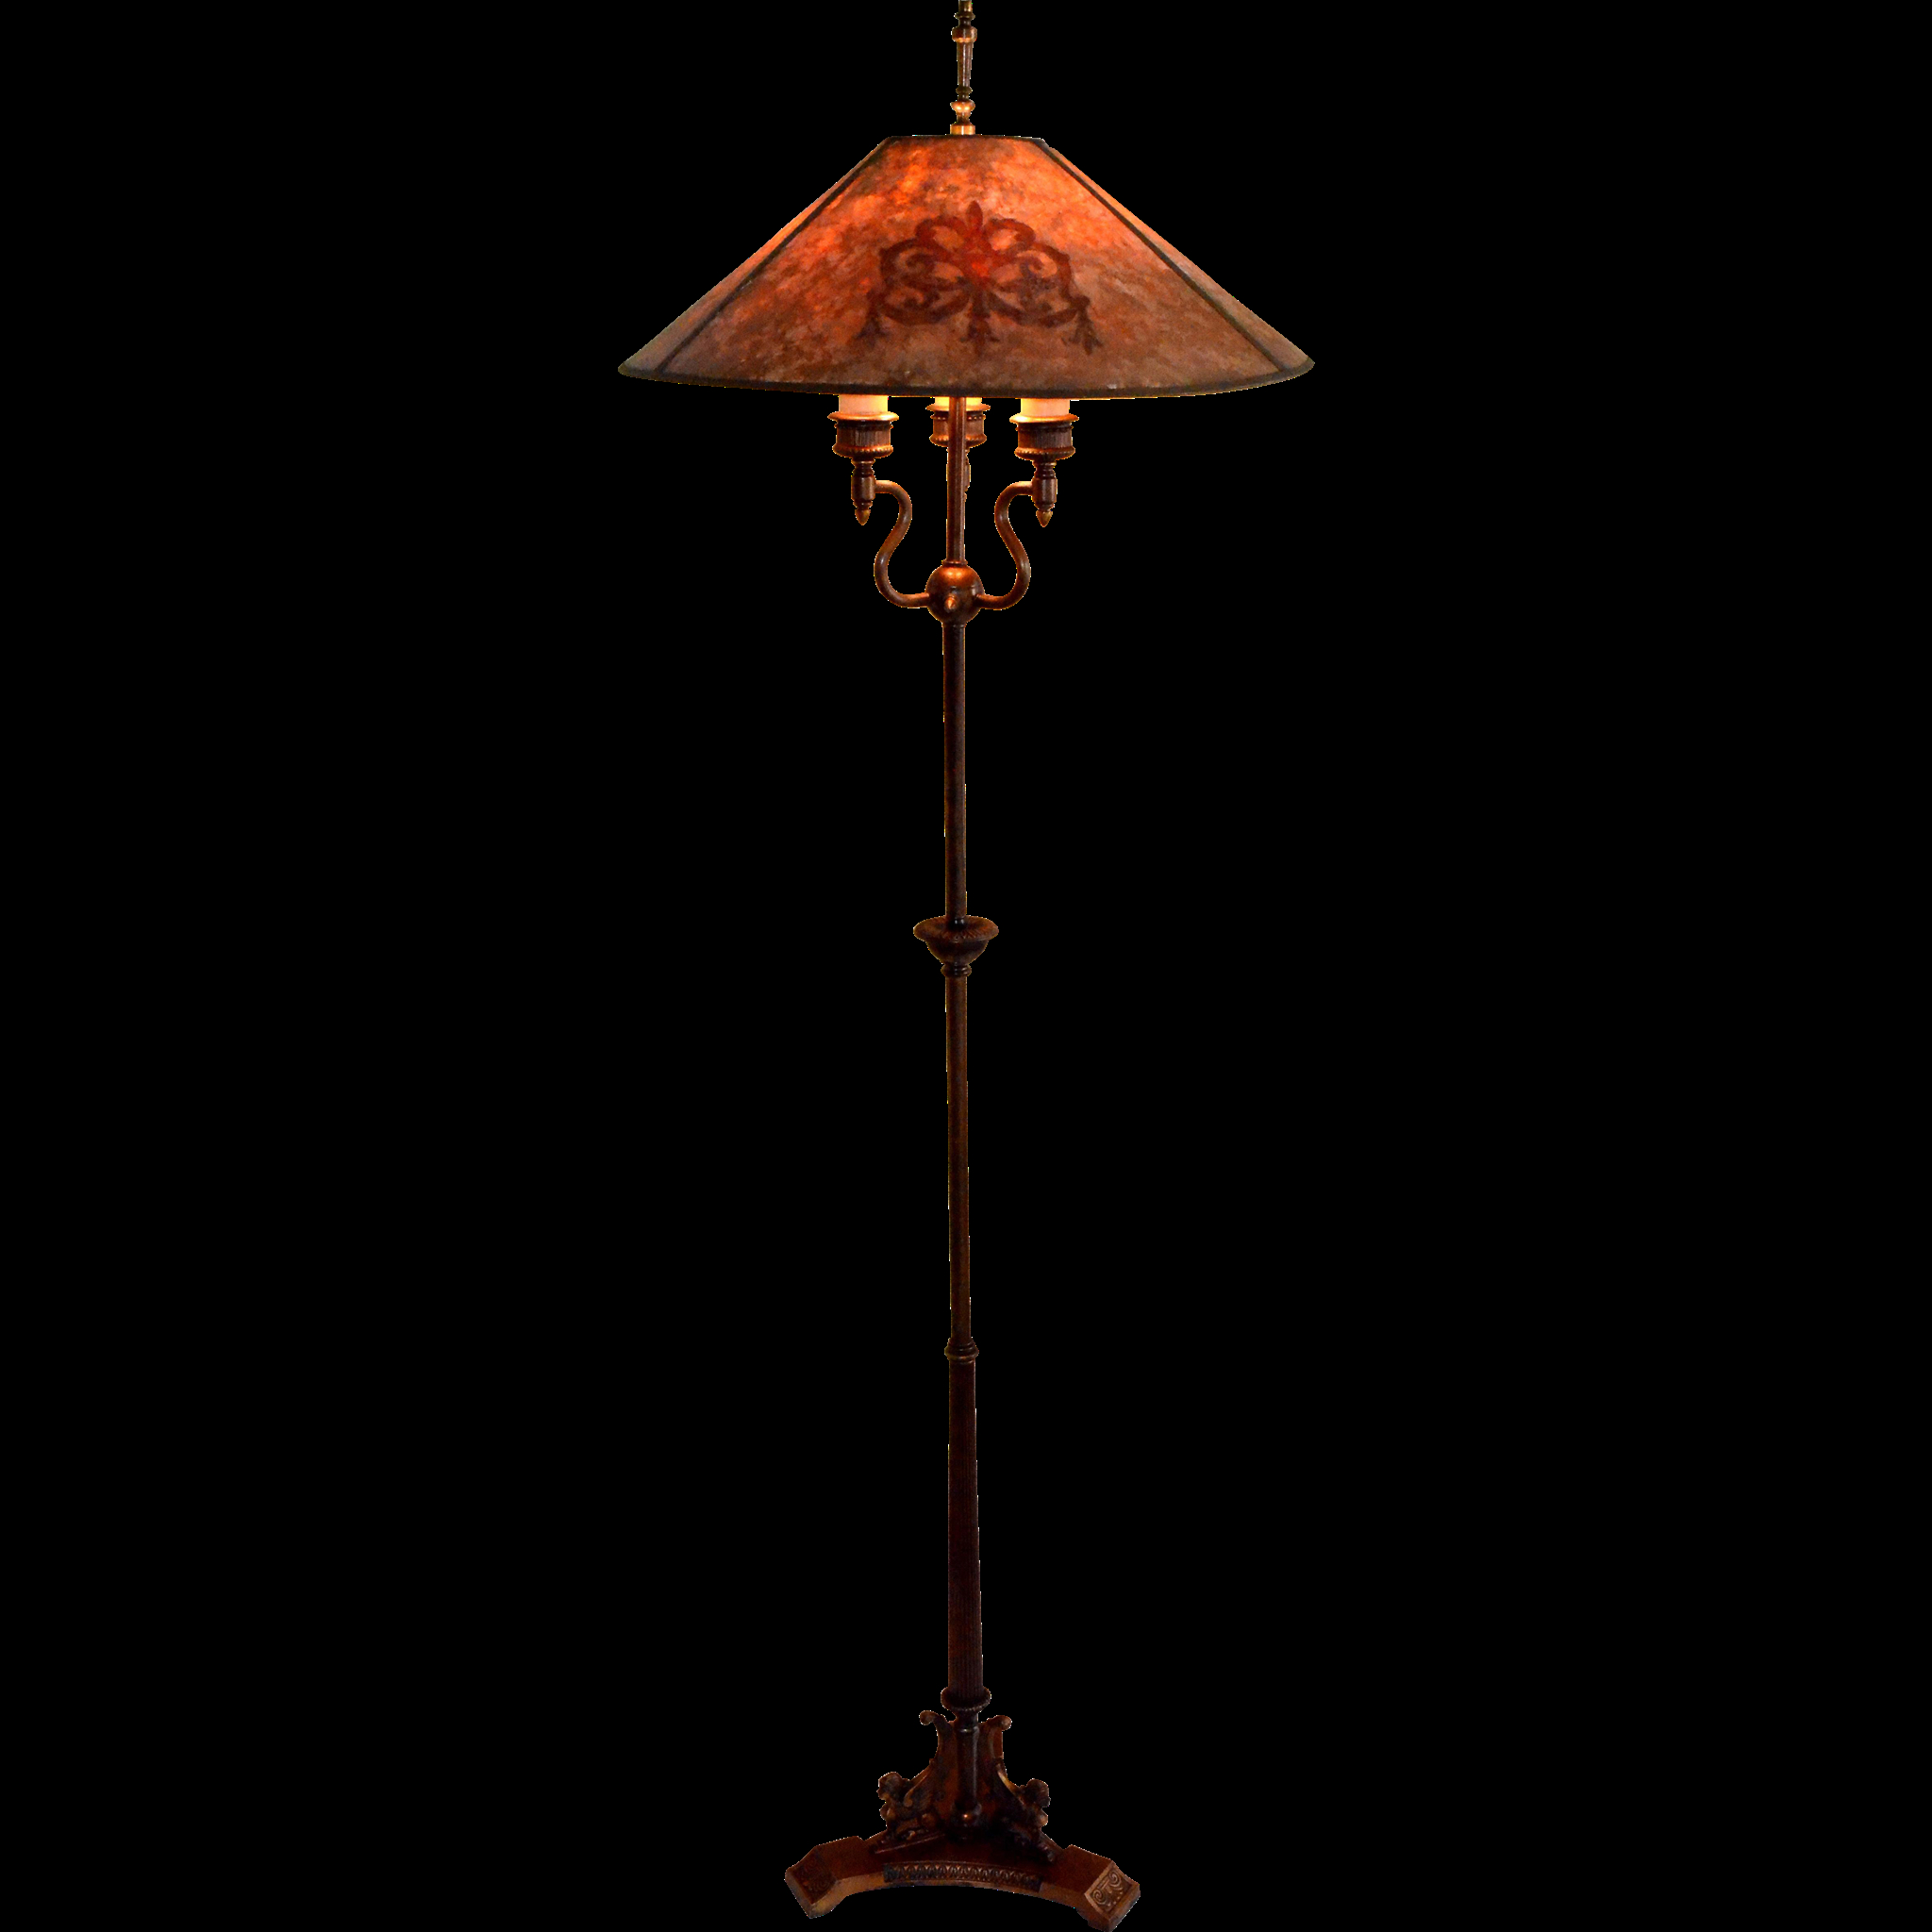 Antique Floor Lamp With Mica Shade Signed Mutual Sunset Lamp Co regarding dimensions 2048 X 2048